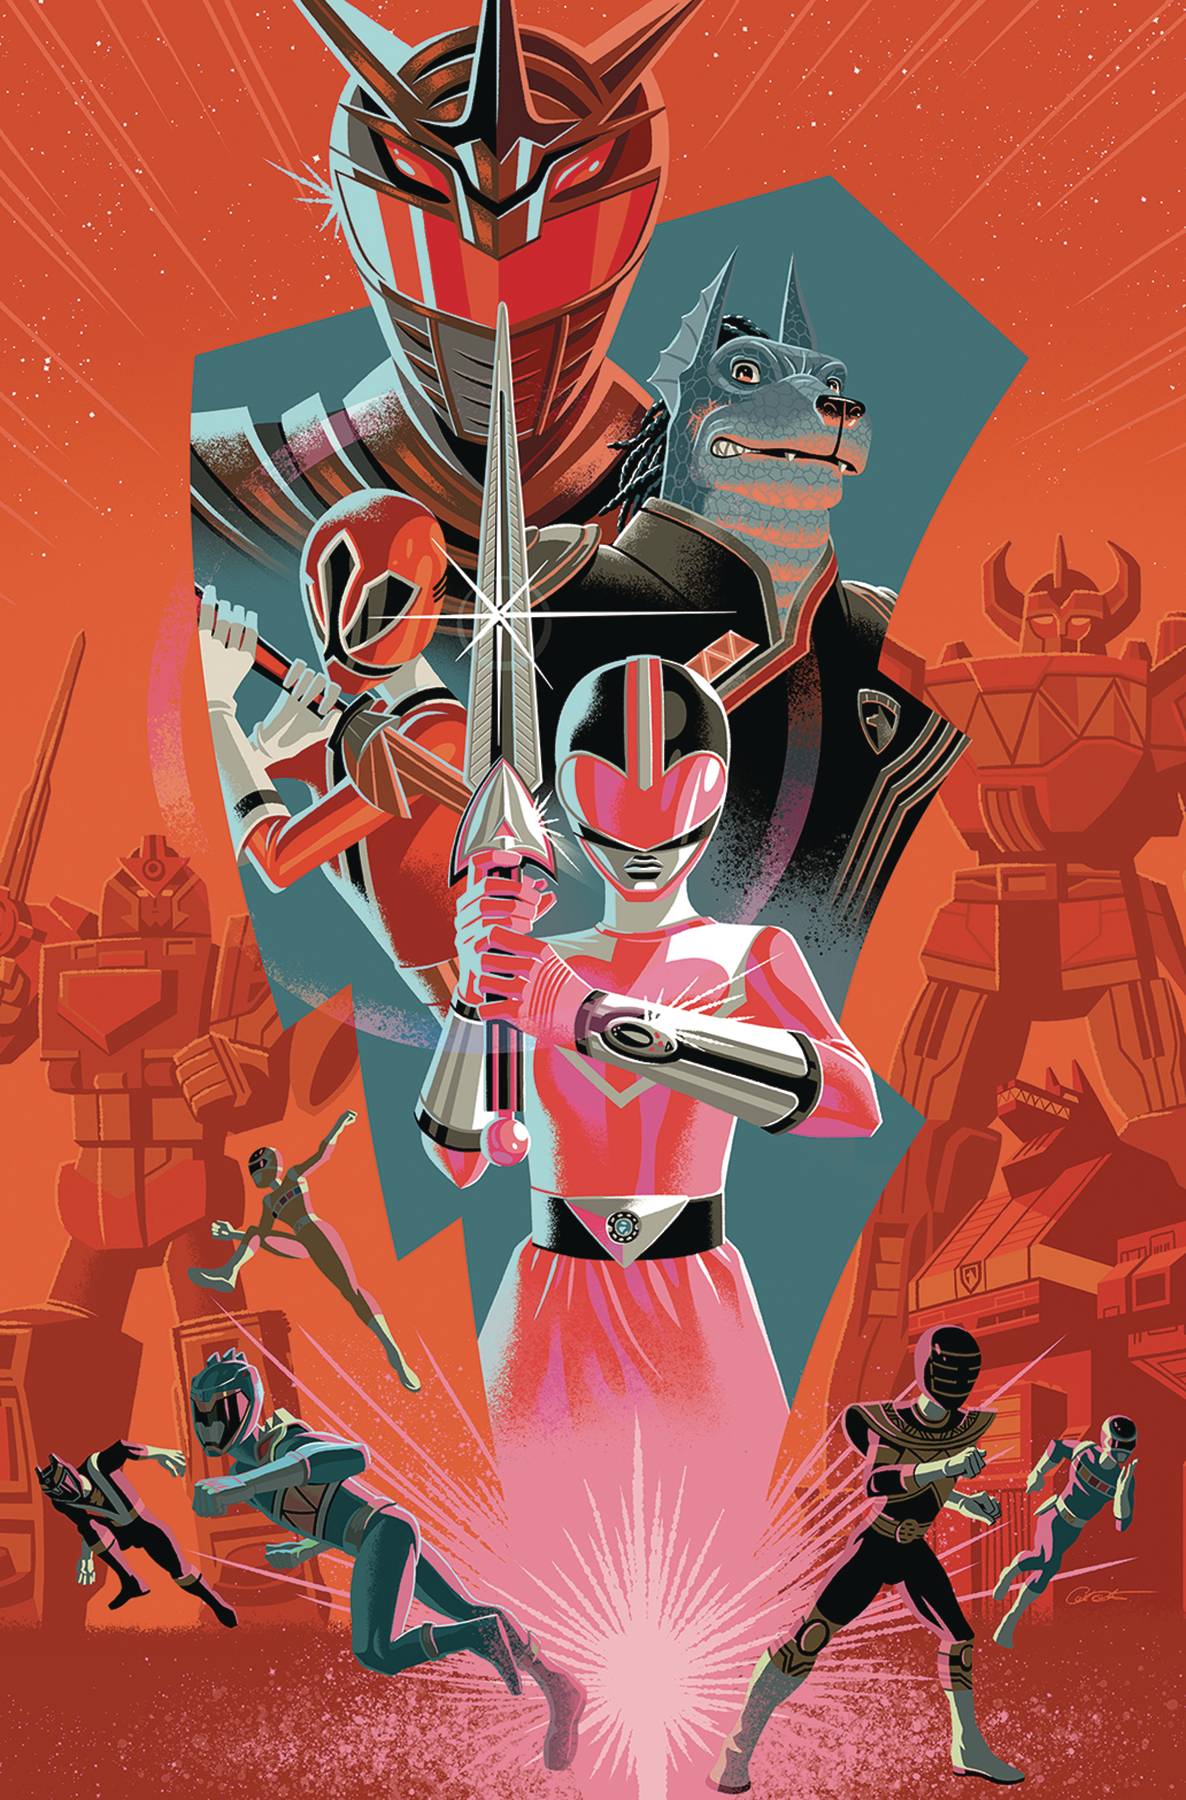 Mighty Morphin Power Rangers 2018 Annual #1 1 for 10 Incentive Sg